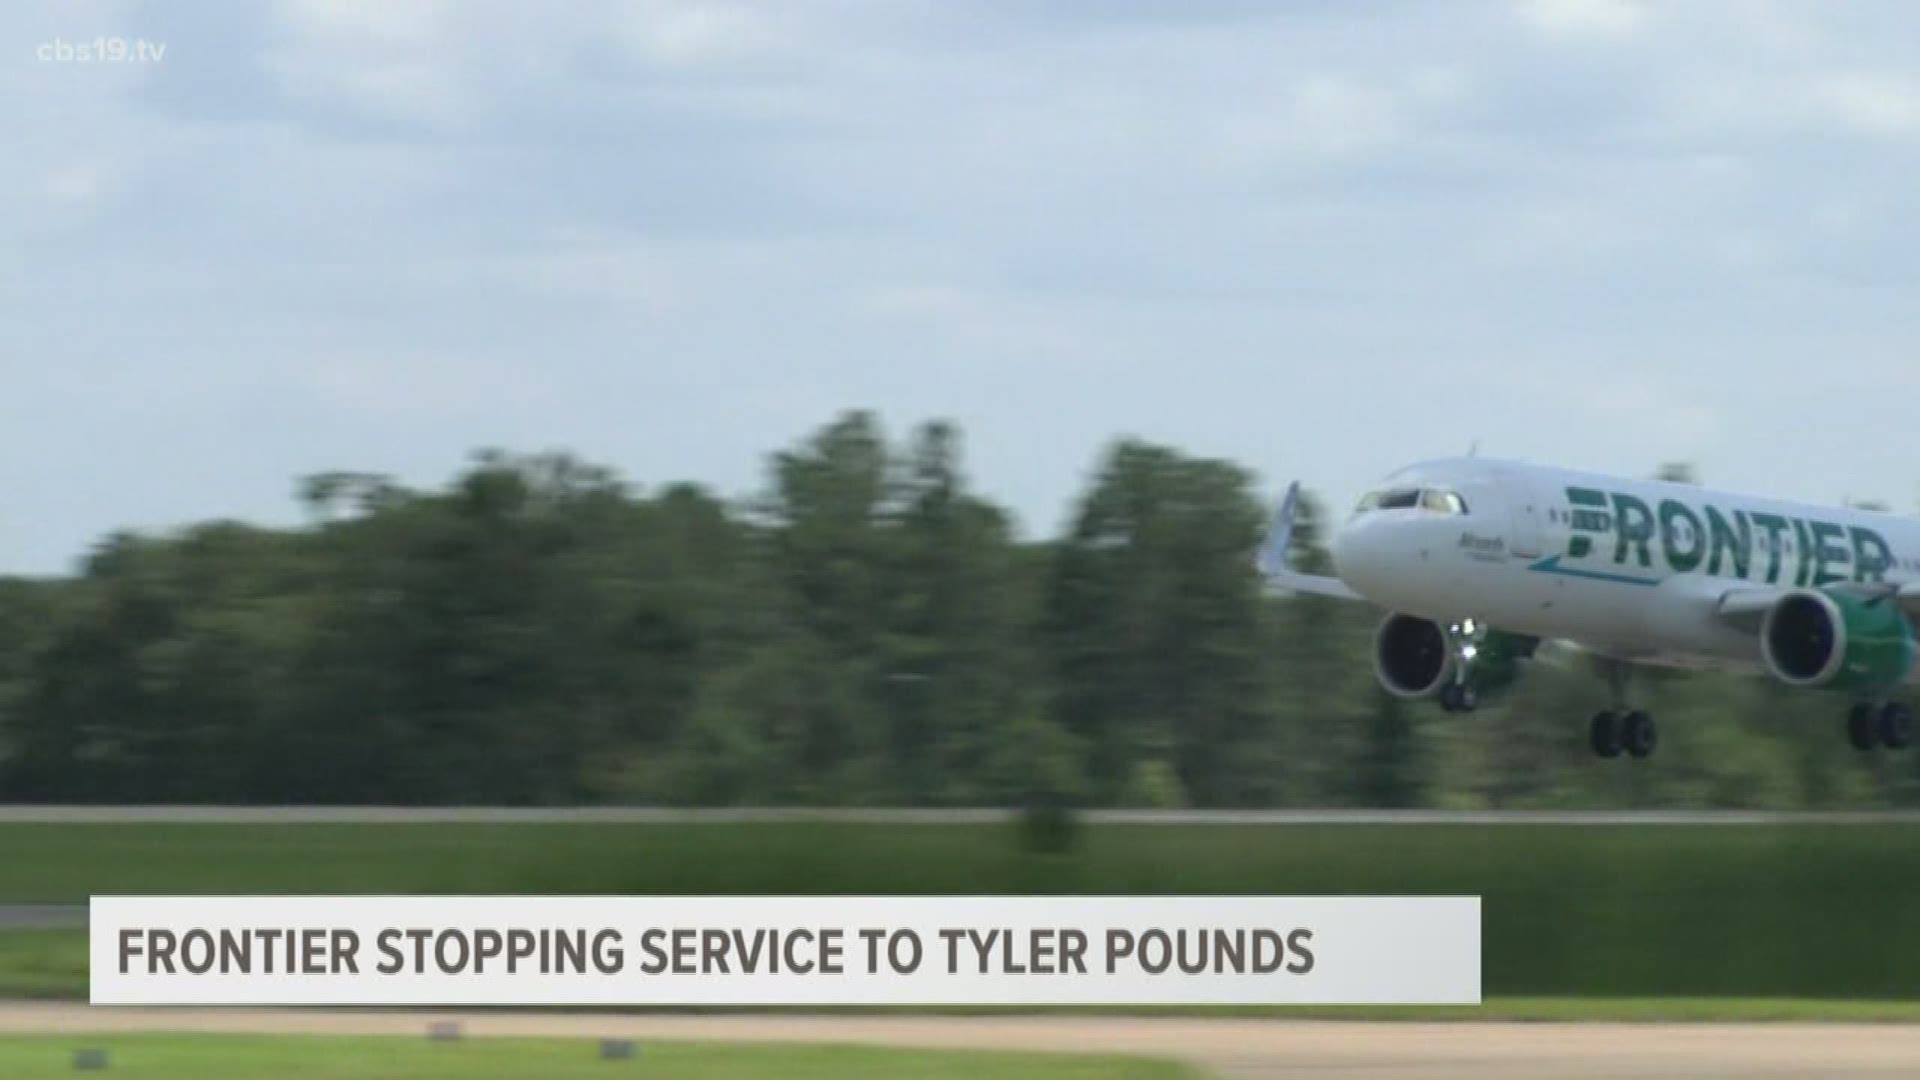 Frontier Airlines cited a lack of demand as the reason for stopping service to Tyler Pounds Regional Airport.